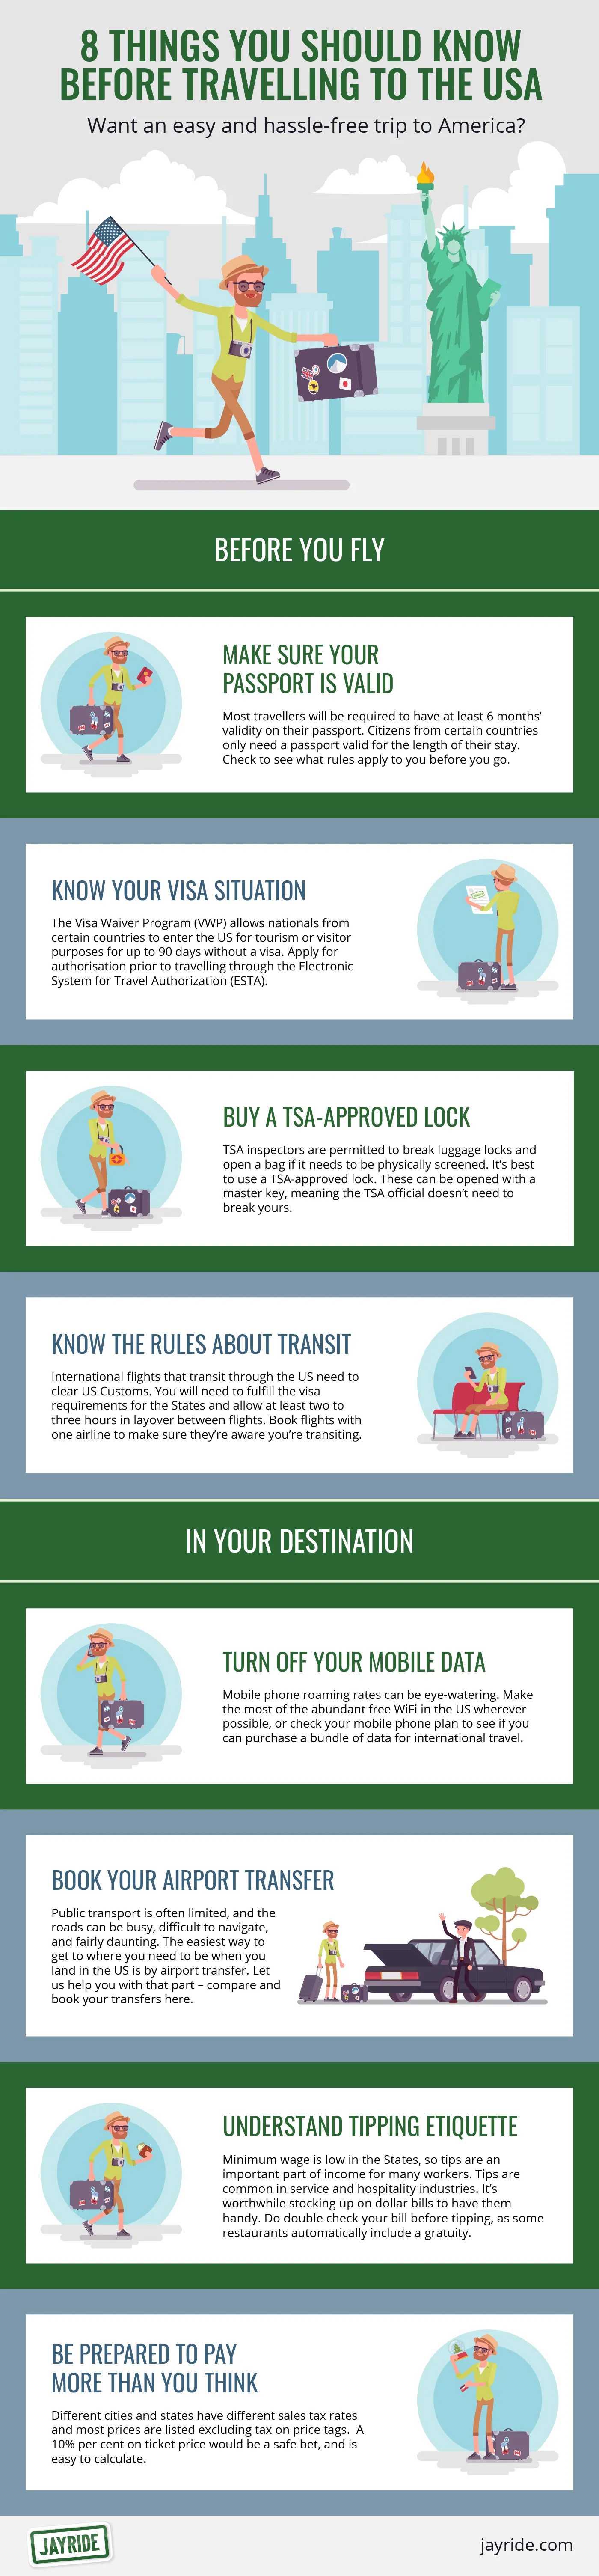 tips while travelling to usa